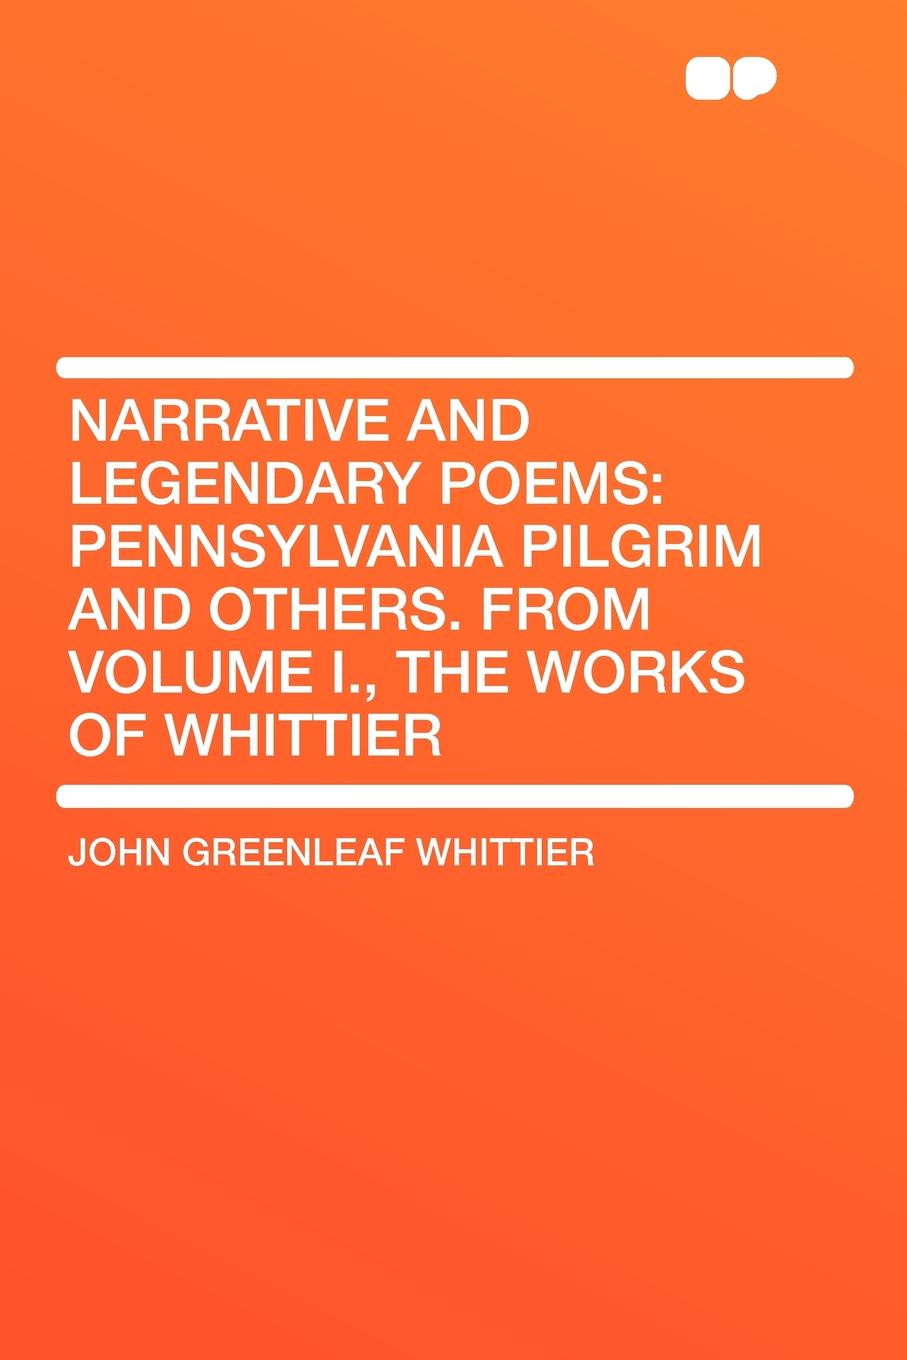 Narrative and Legendary Poems. Pennsylvania Pilgrim and Others. From Volume I., the Works of Whittier